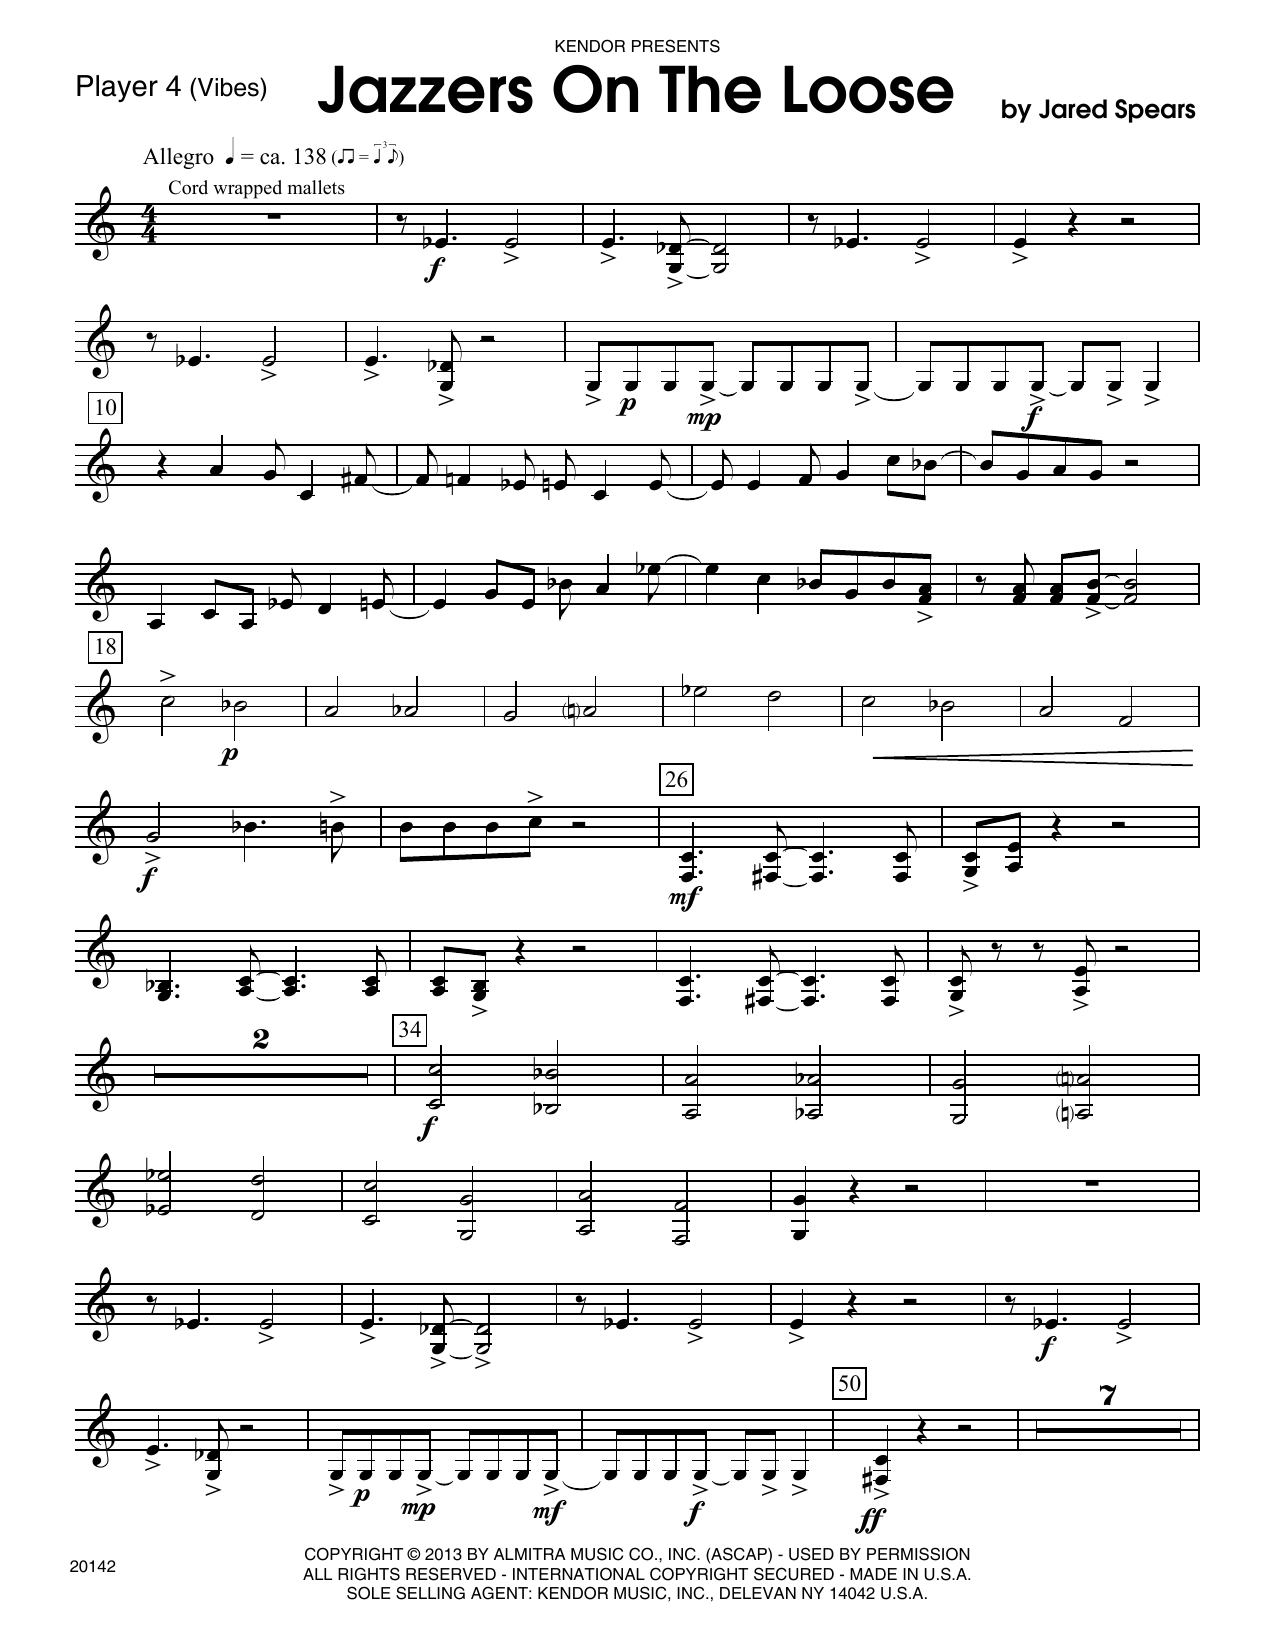 Download Jared Spears Jazzers On The Loose - Vibes Sheet Music